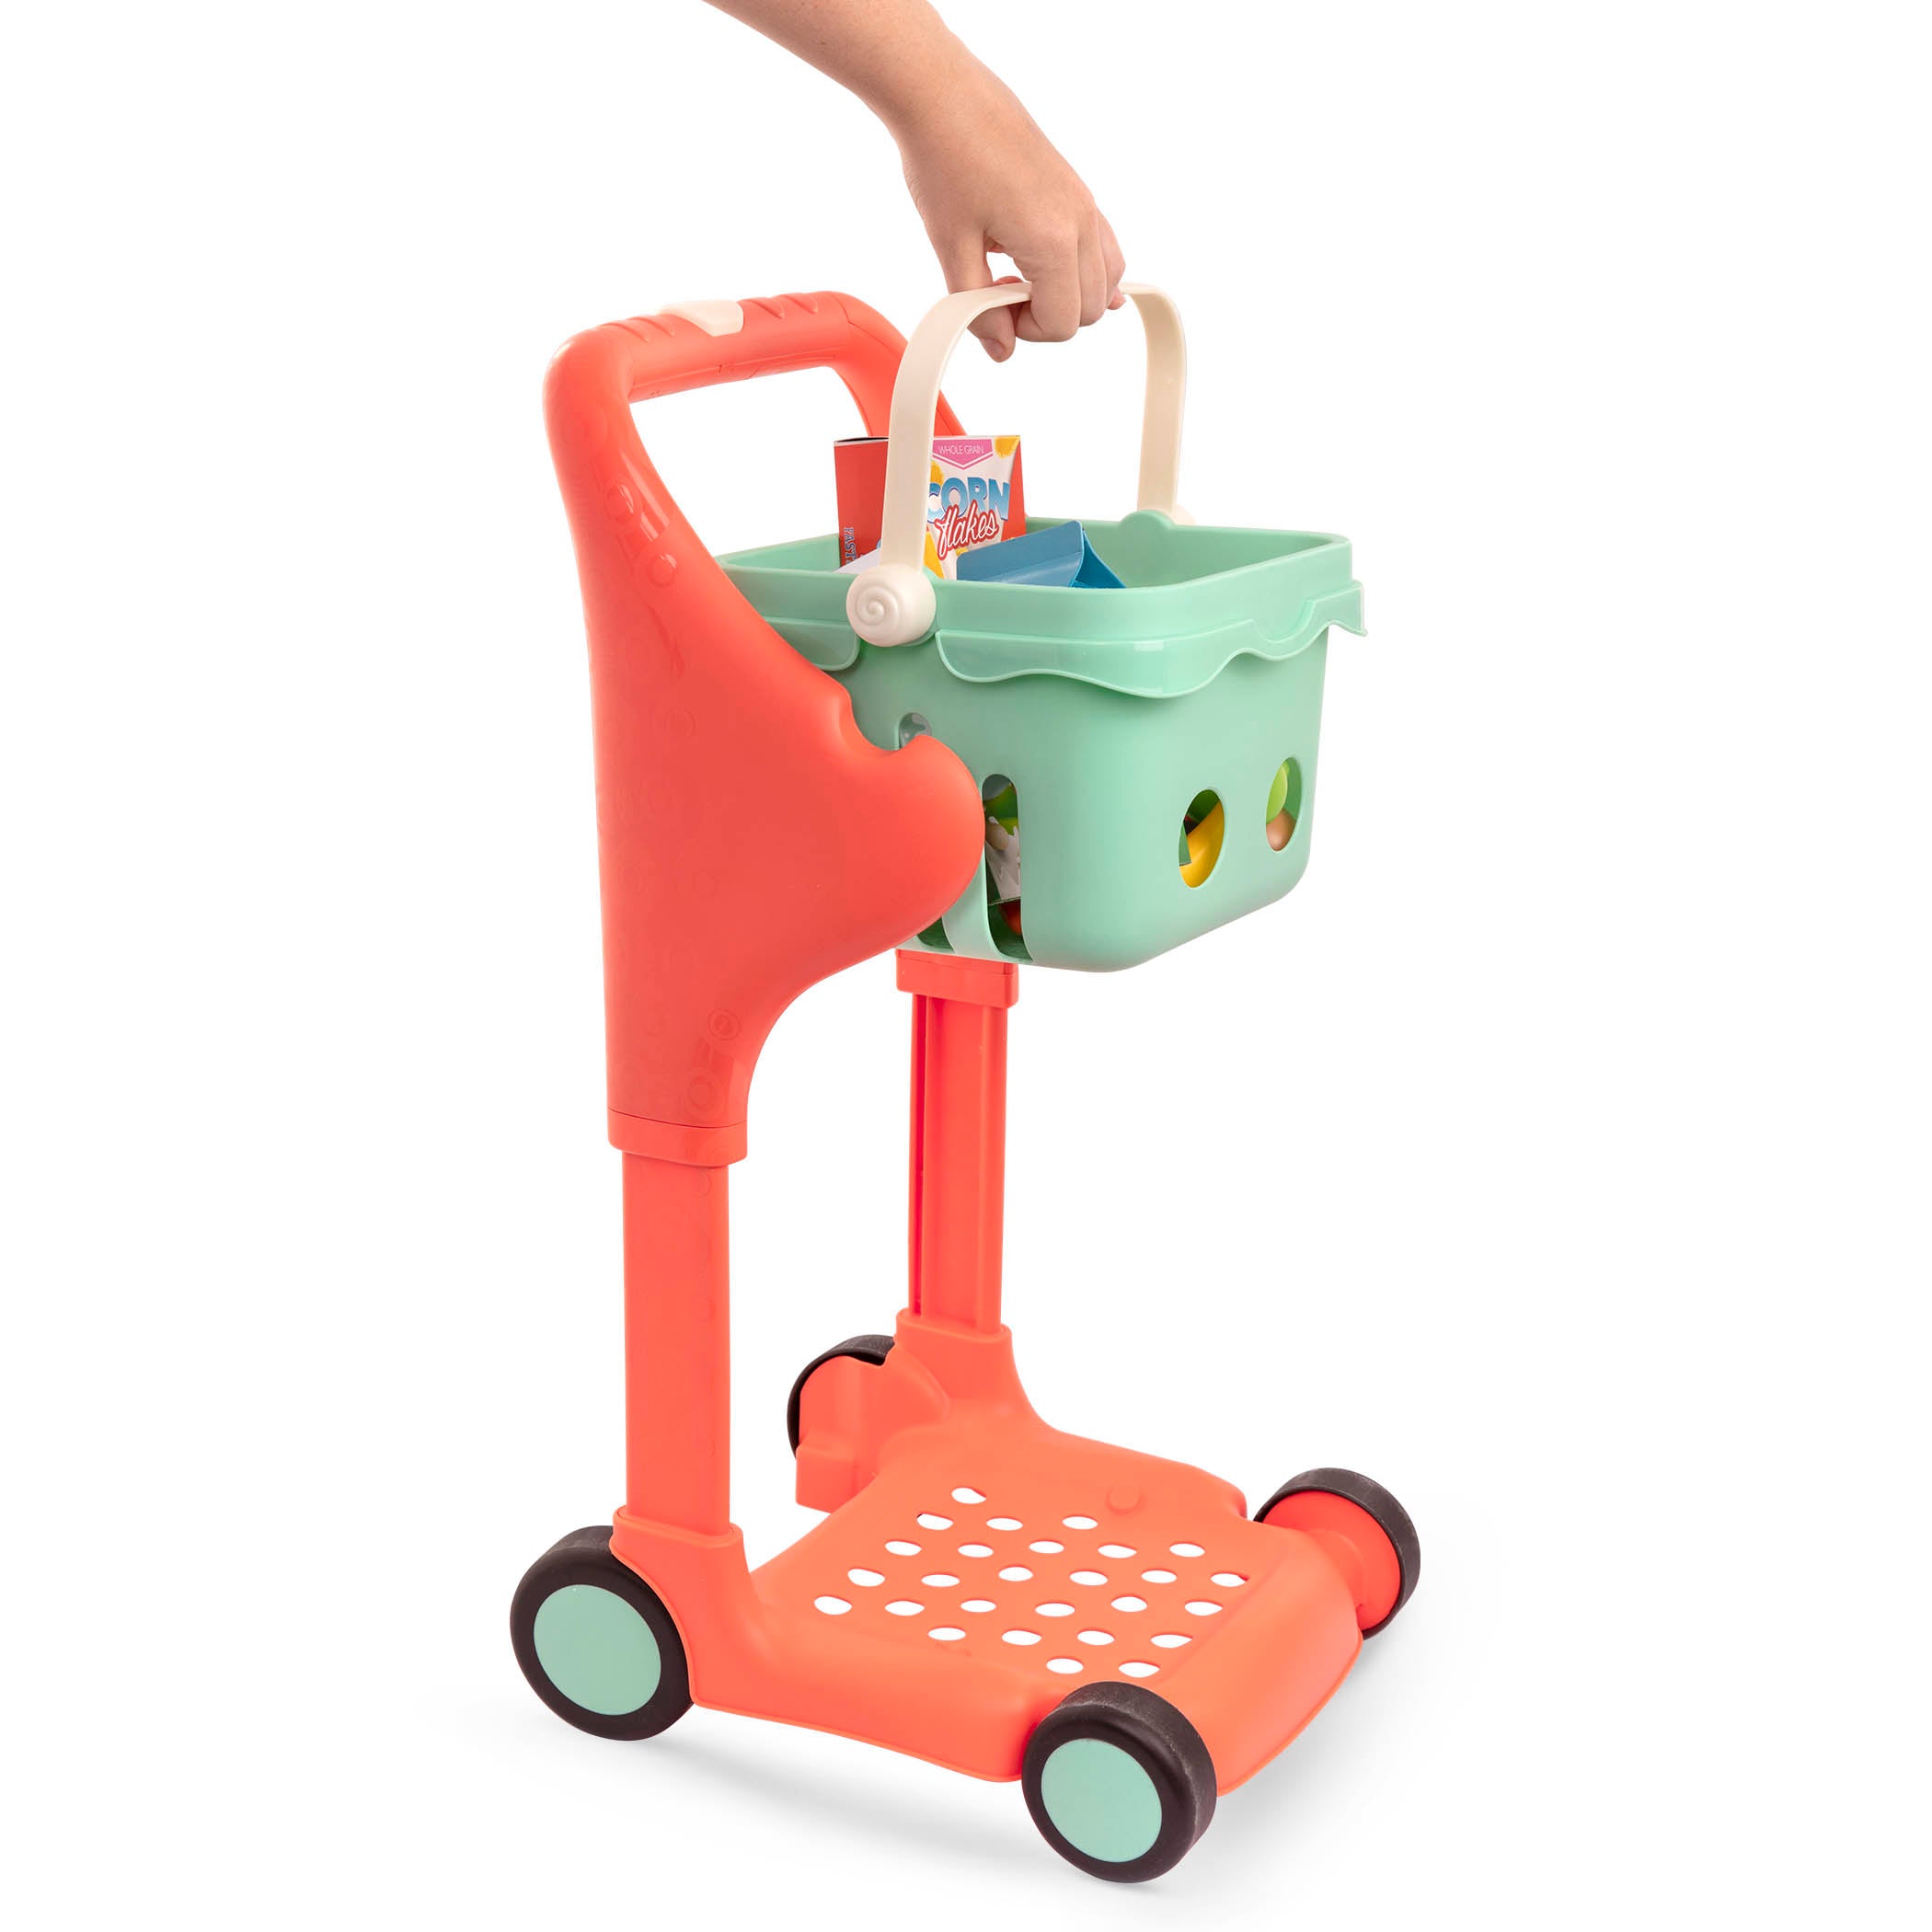 Toy shopping cart with play food.